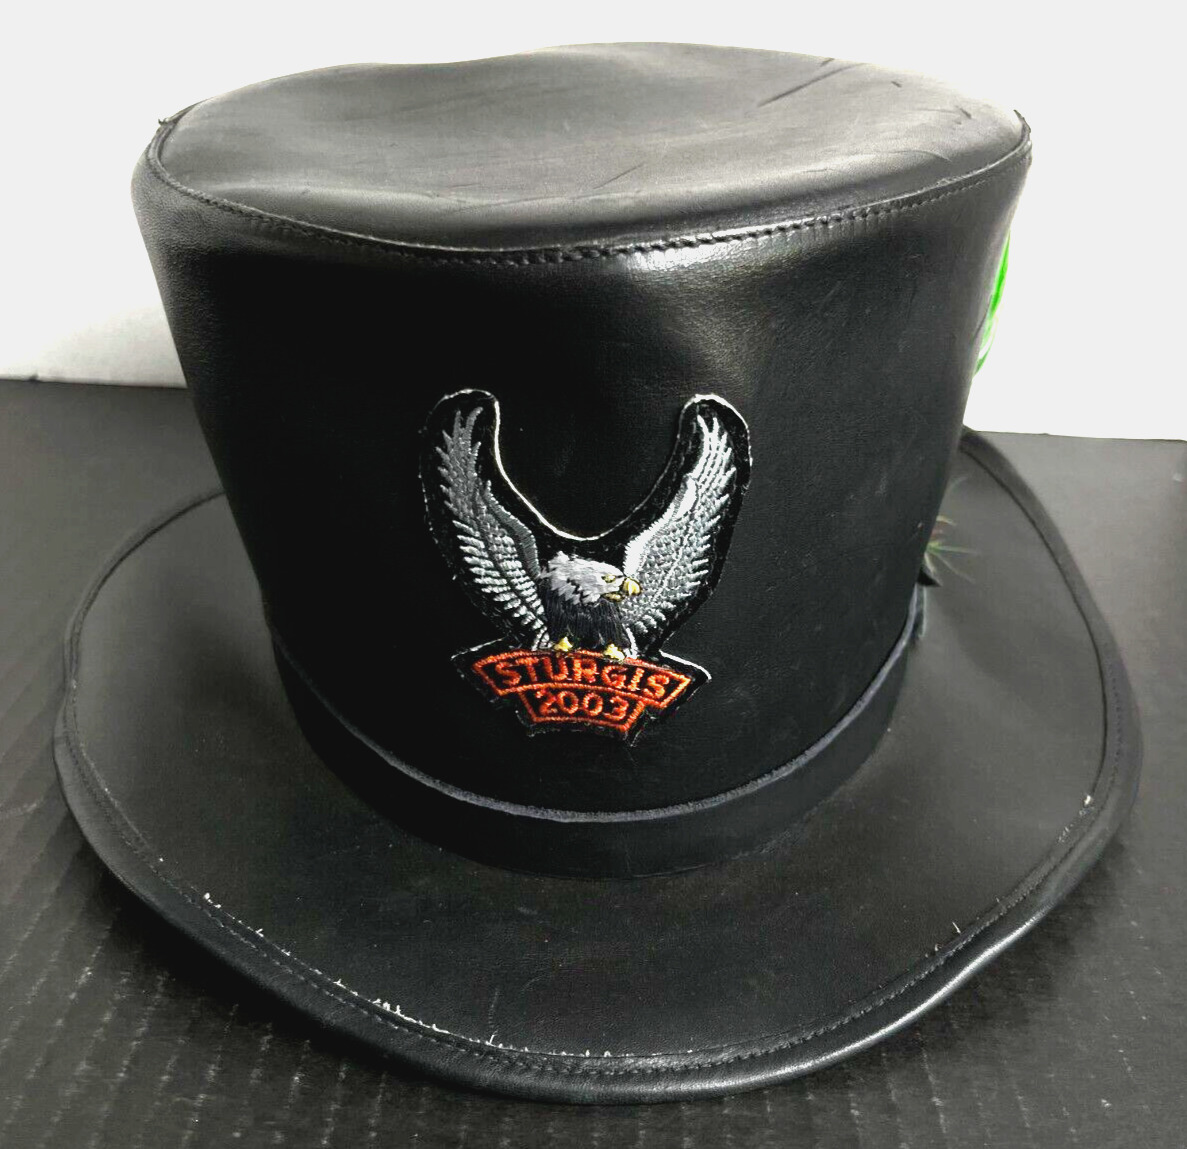 Vintage Sturgis 2003 XL Top Hat Mad Hatter Black Leather Winfield Cover Co. SF